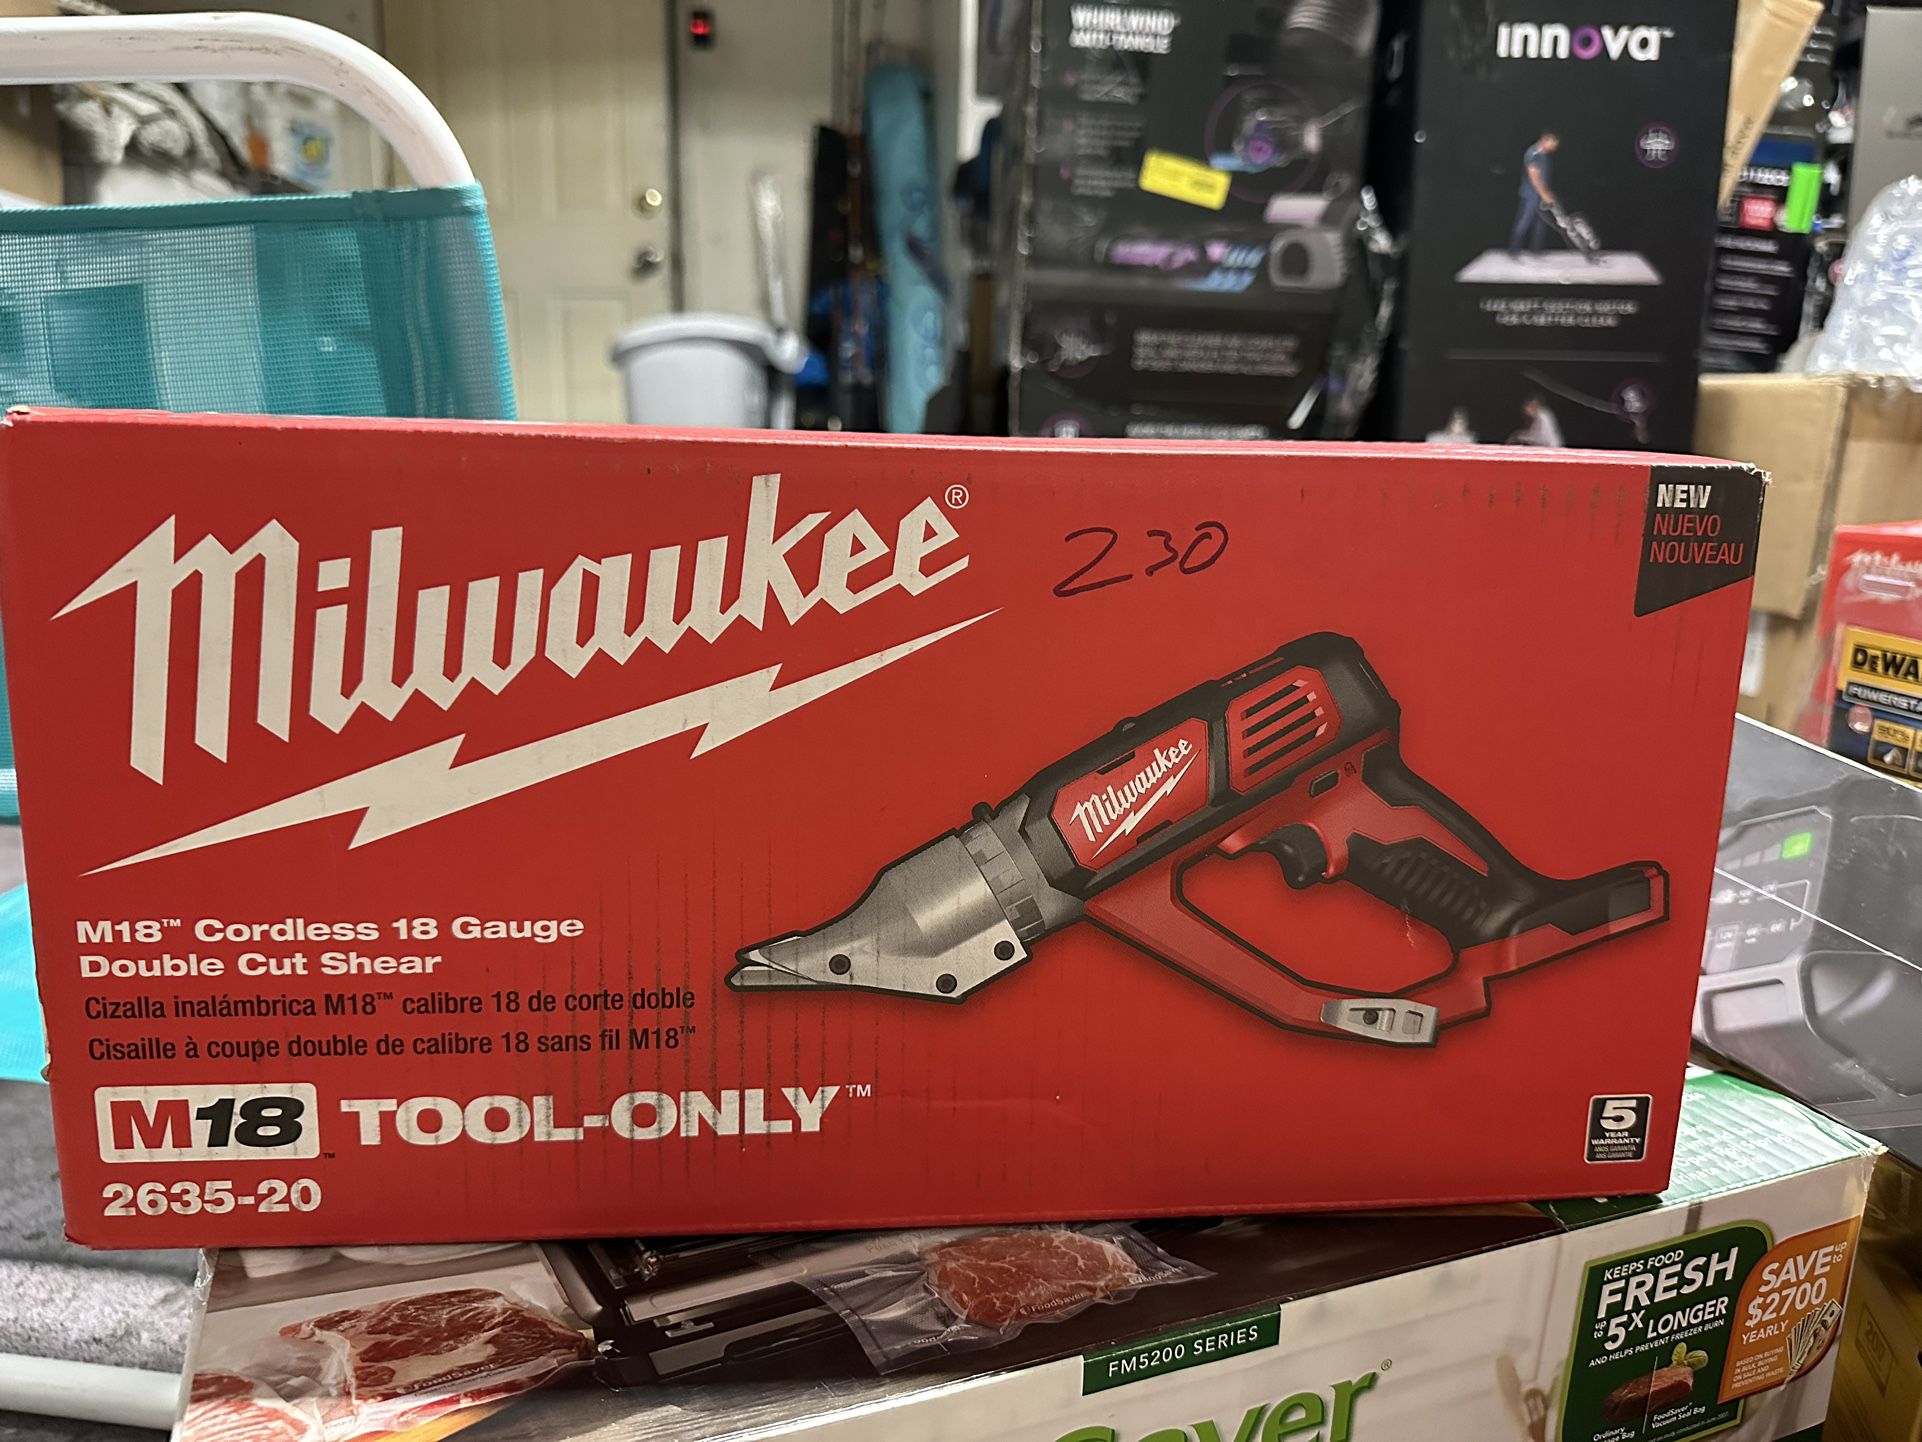 Milwaukee 2635-20 M18 Cordless 18 Gauge Double Cut Shear Bare tool for  Sale in Anaheim, CA OfferUp